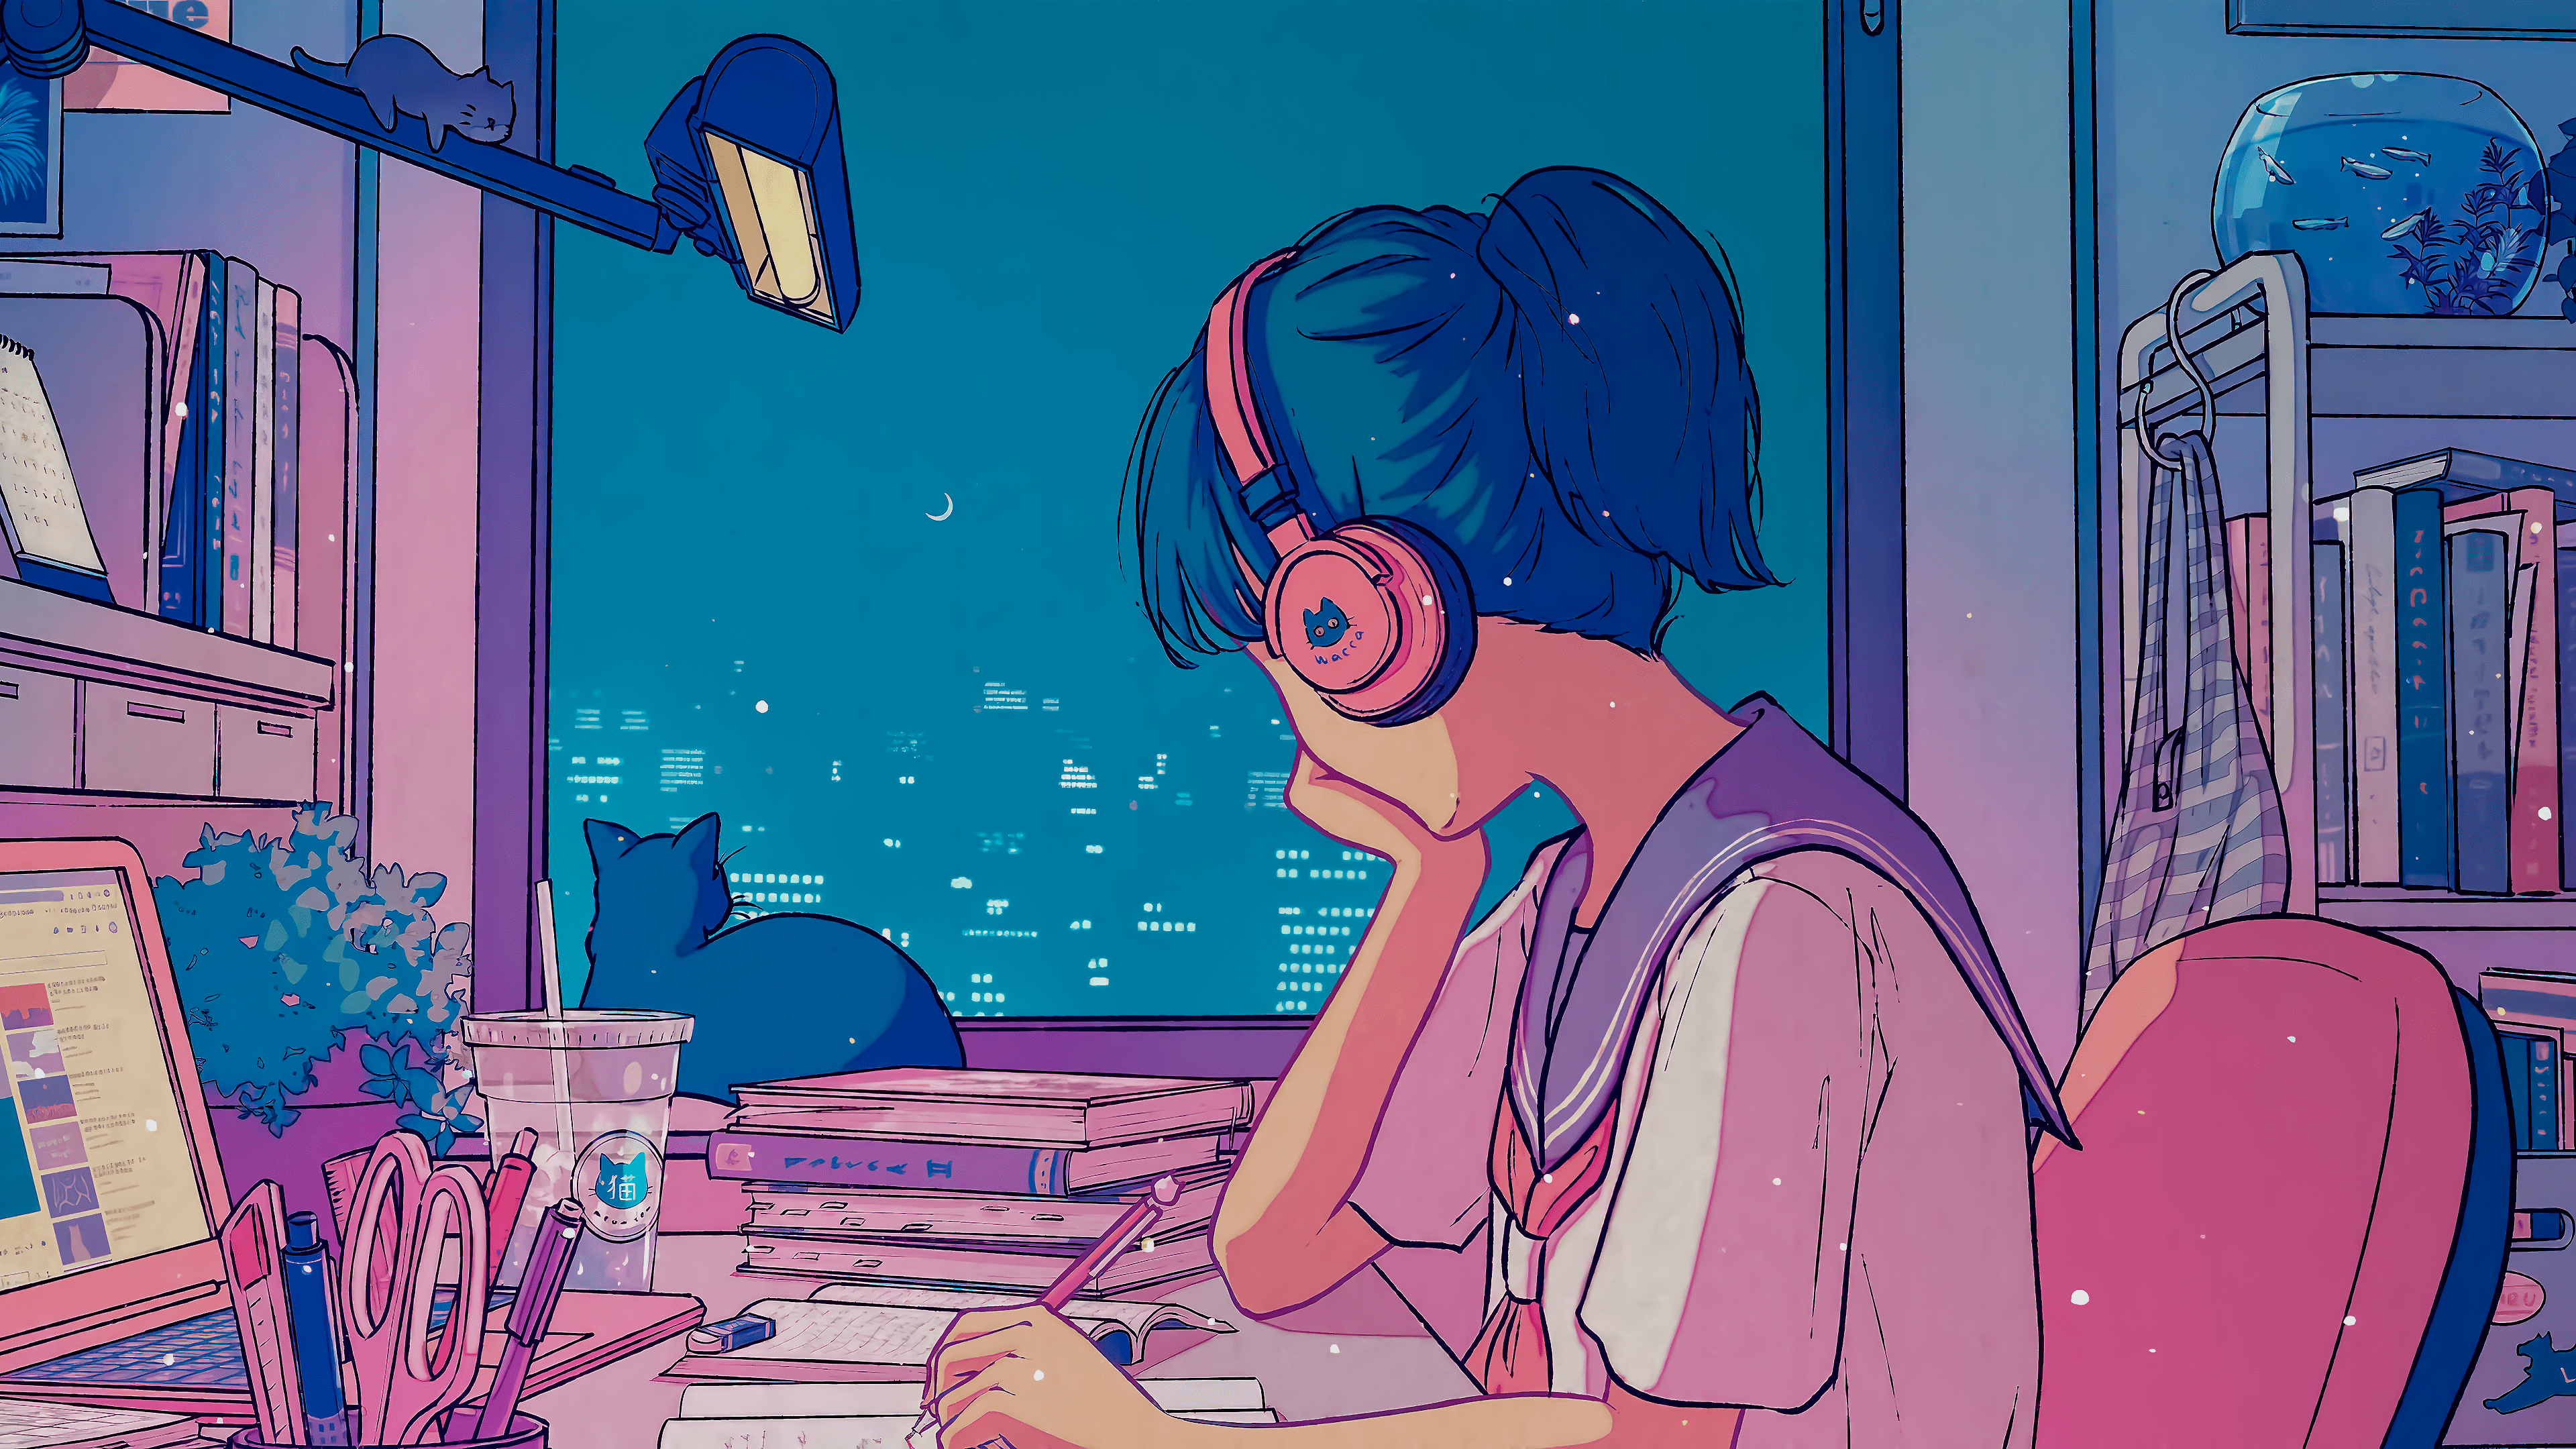 A girl sitting at her desk with headphones on - Lo fi